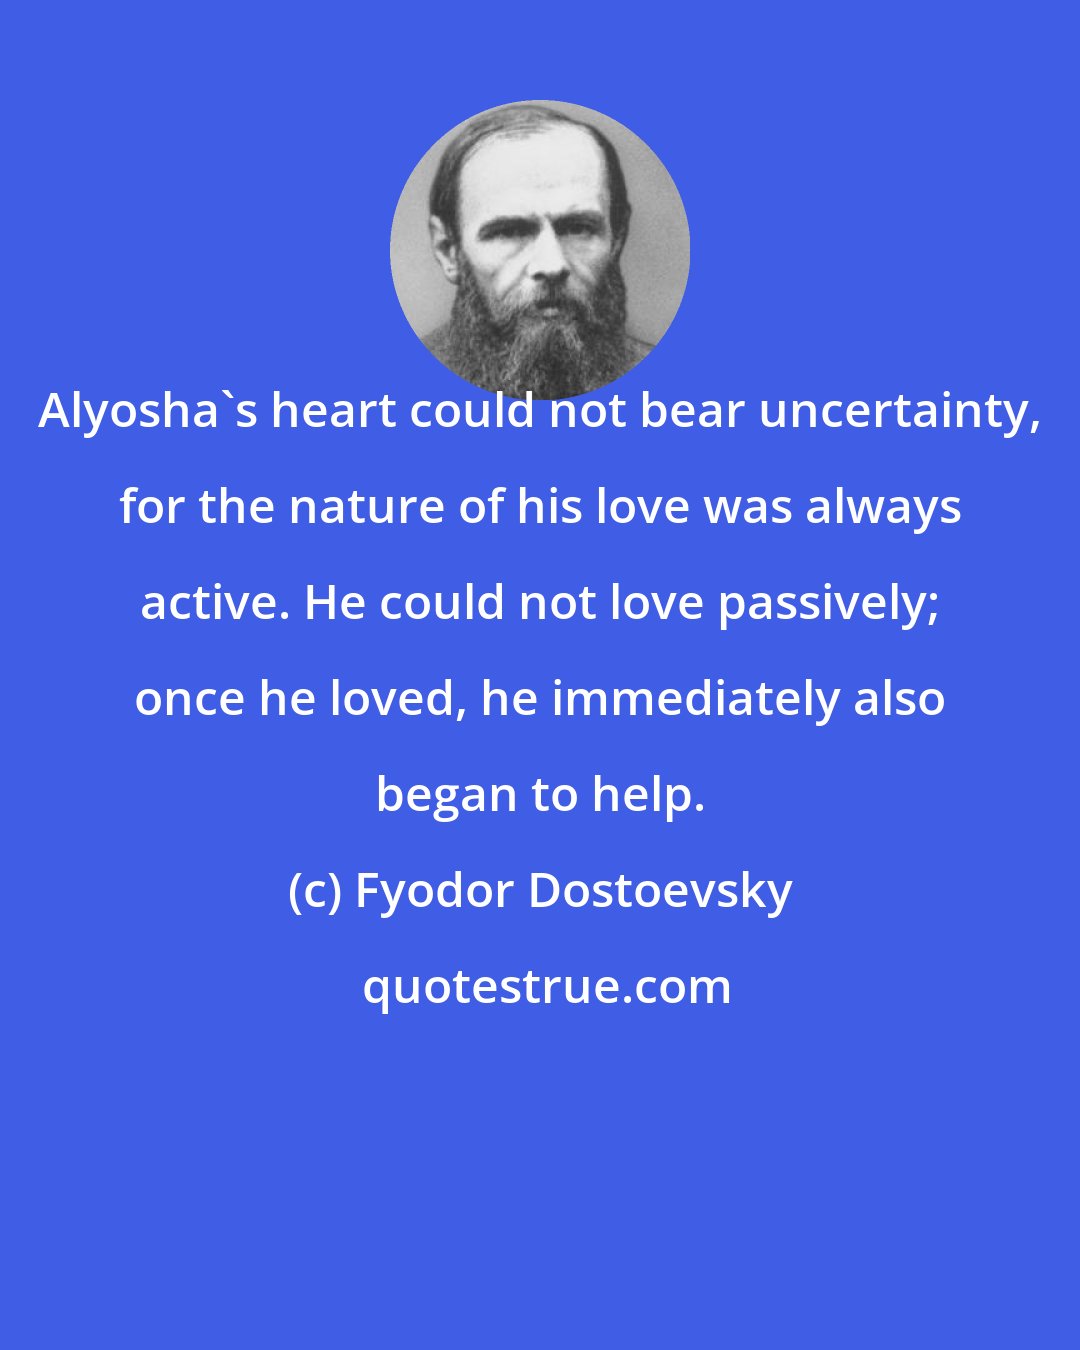 Fyodor Dostoevsky: Alyosha's heart could not bear uncertainty, for the nature of his love was always active. He could not love passively; once he loved, he immediately also began to help.